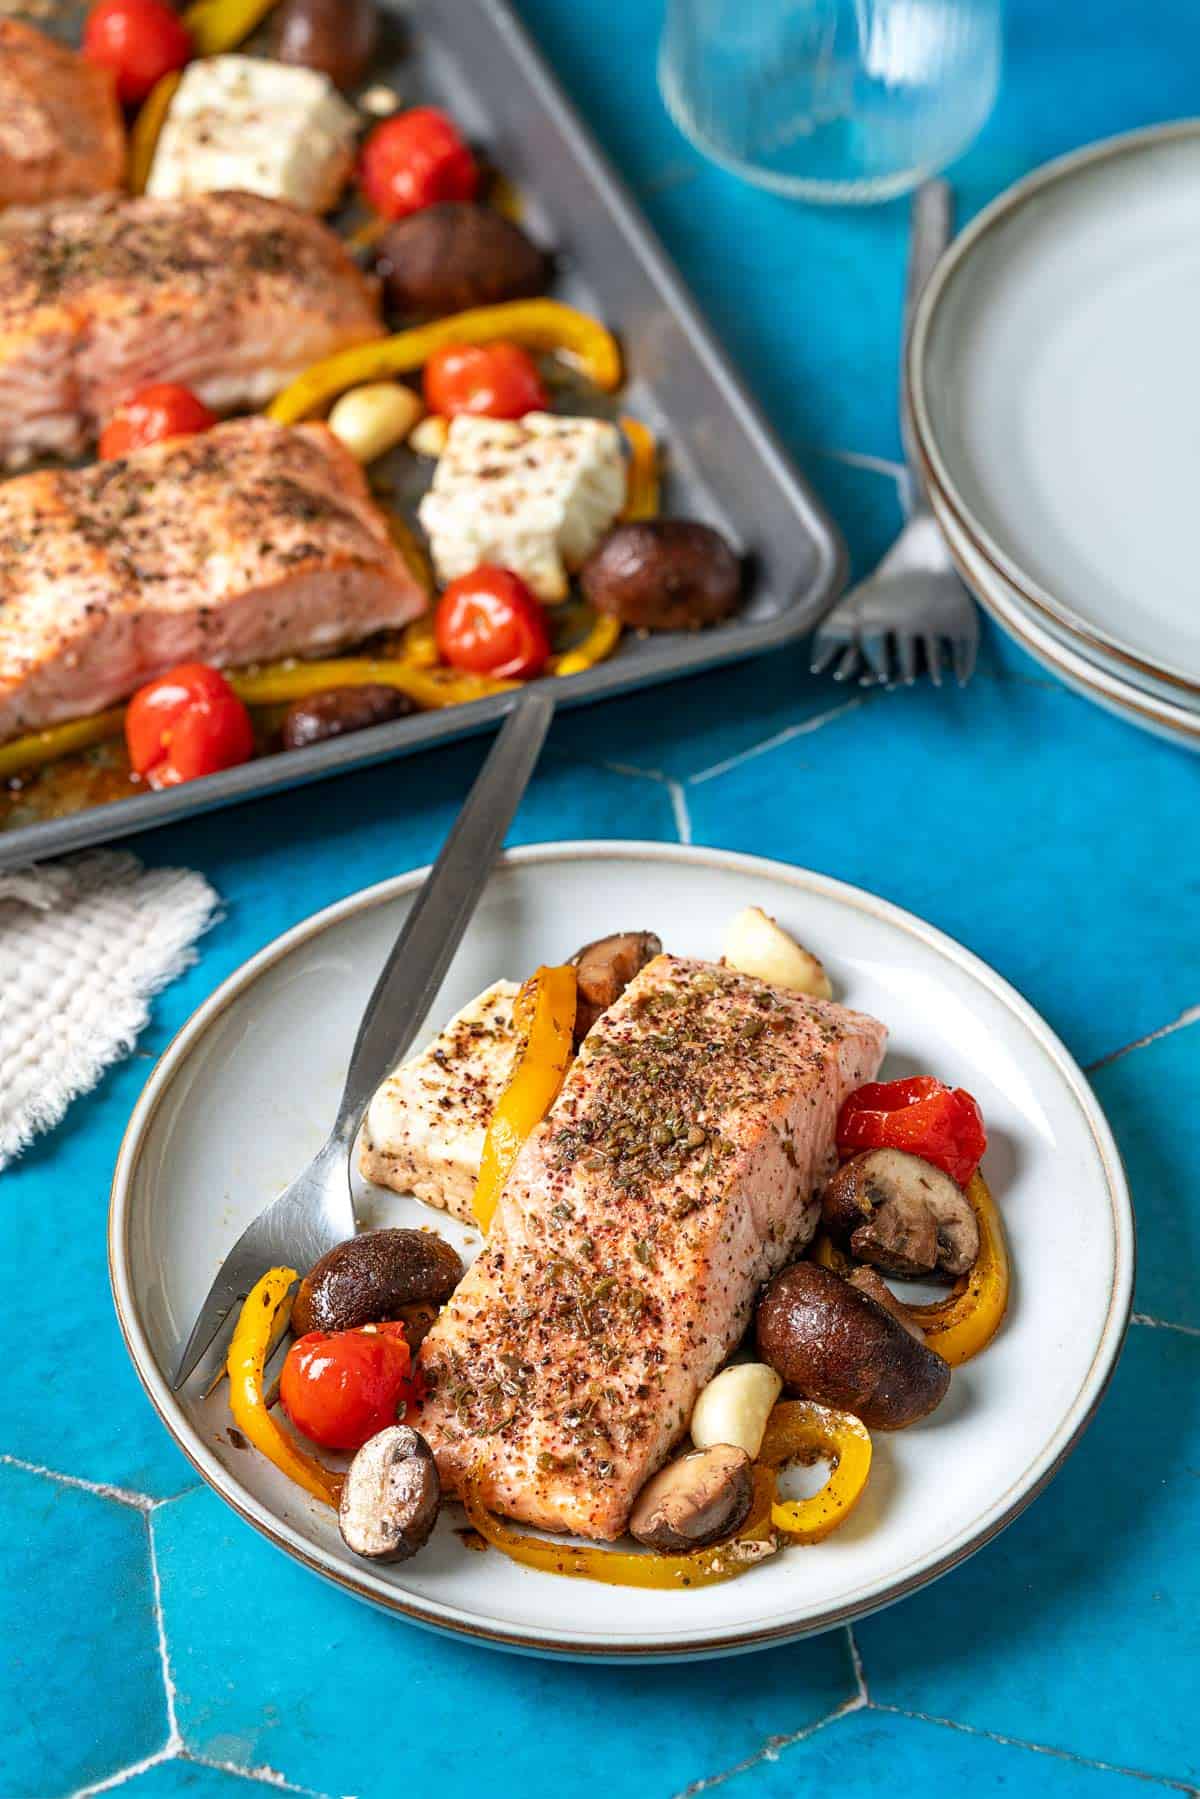 a baked salmon fillet with veggies and feta on a white plate with a fork in front of a sheet pan with baked veggie and feta, a glass, a stack of plates, and 2 forks.